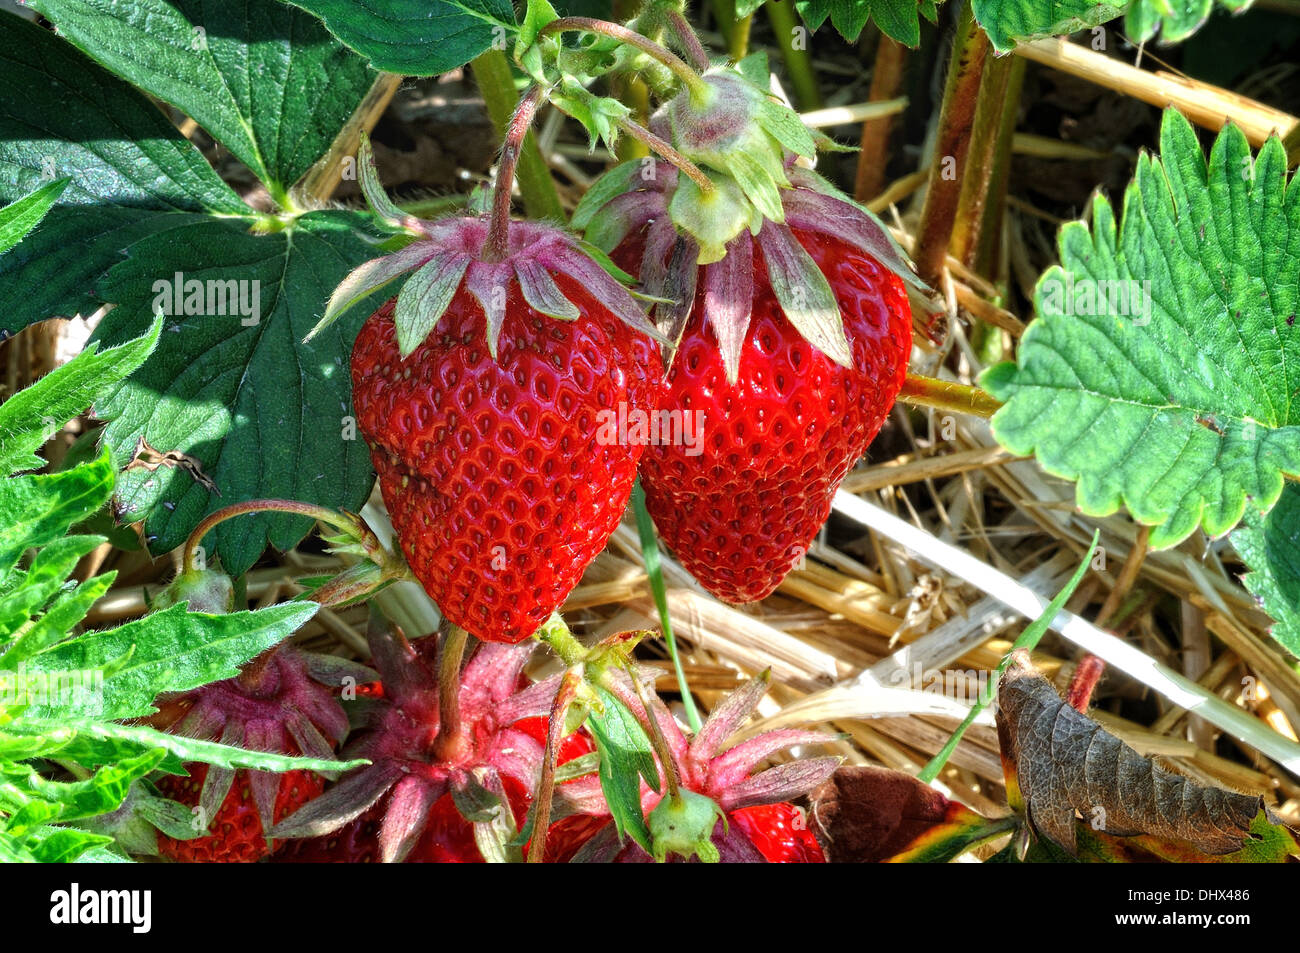 Red strawberries-consumption Stock Photo